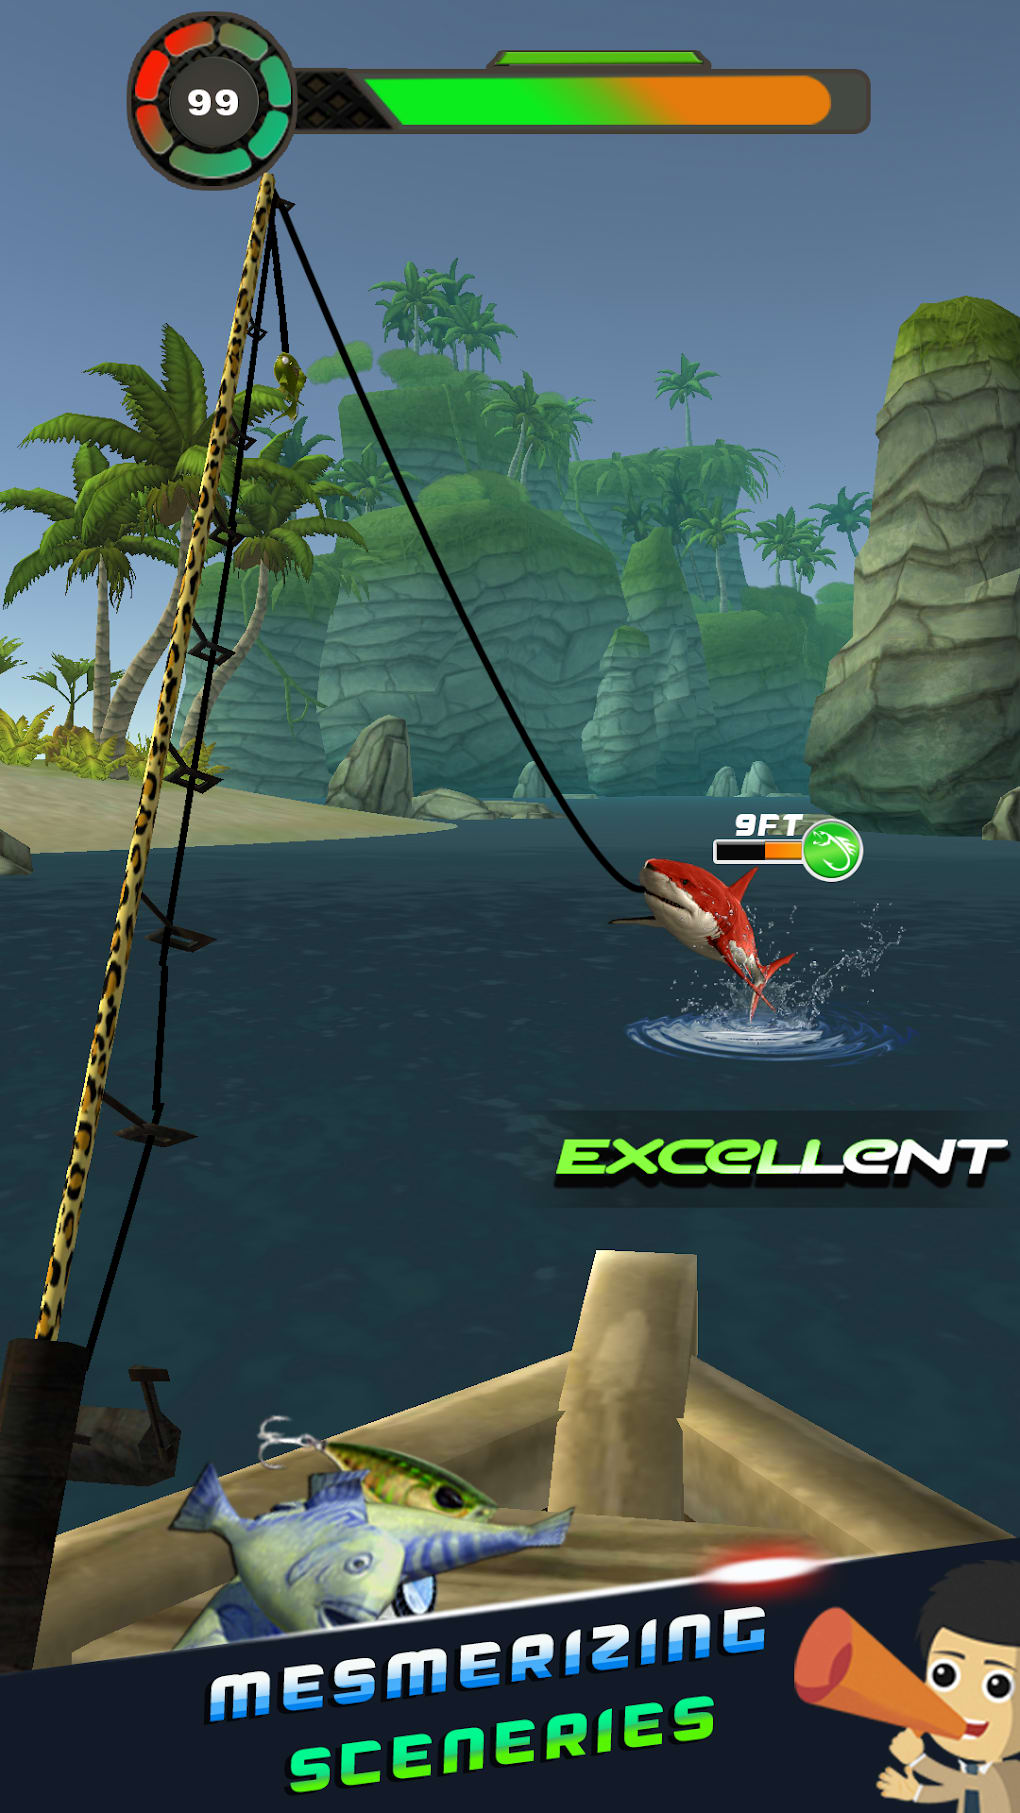 Shark Fishing Simulator 2020 - Free Fishing Games APK for Android - Download